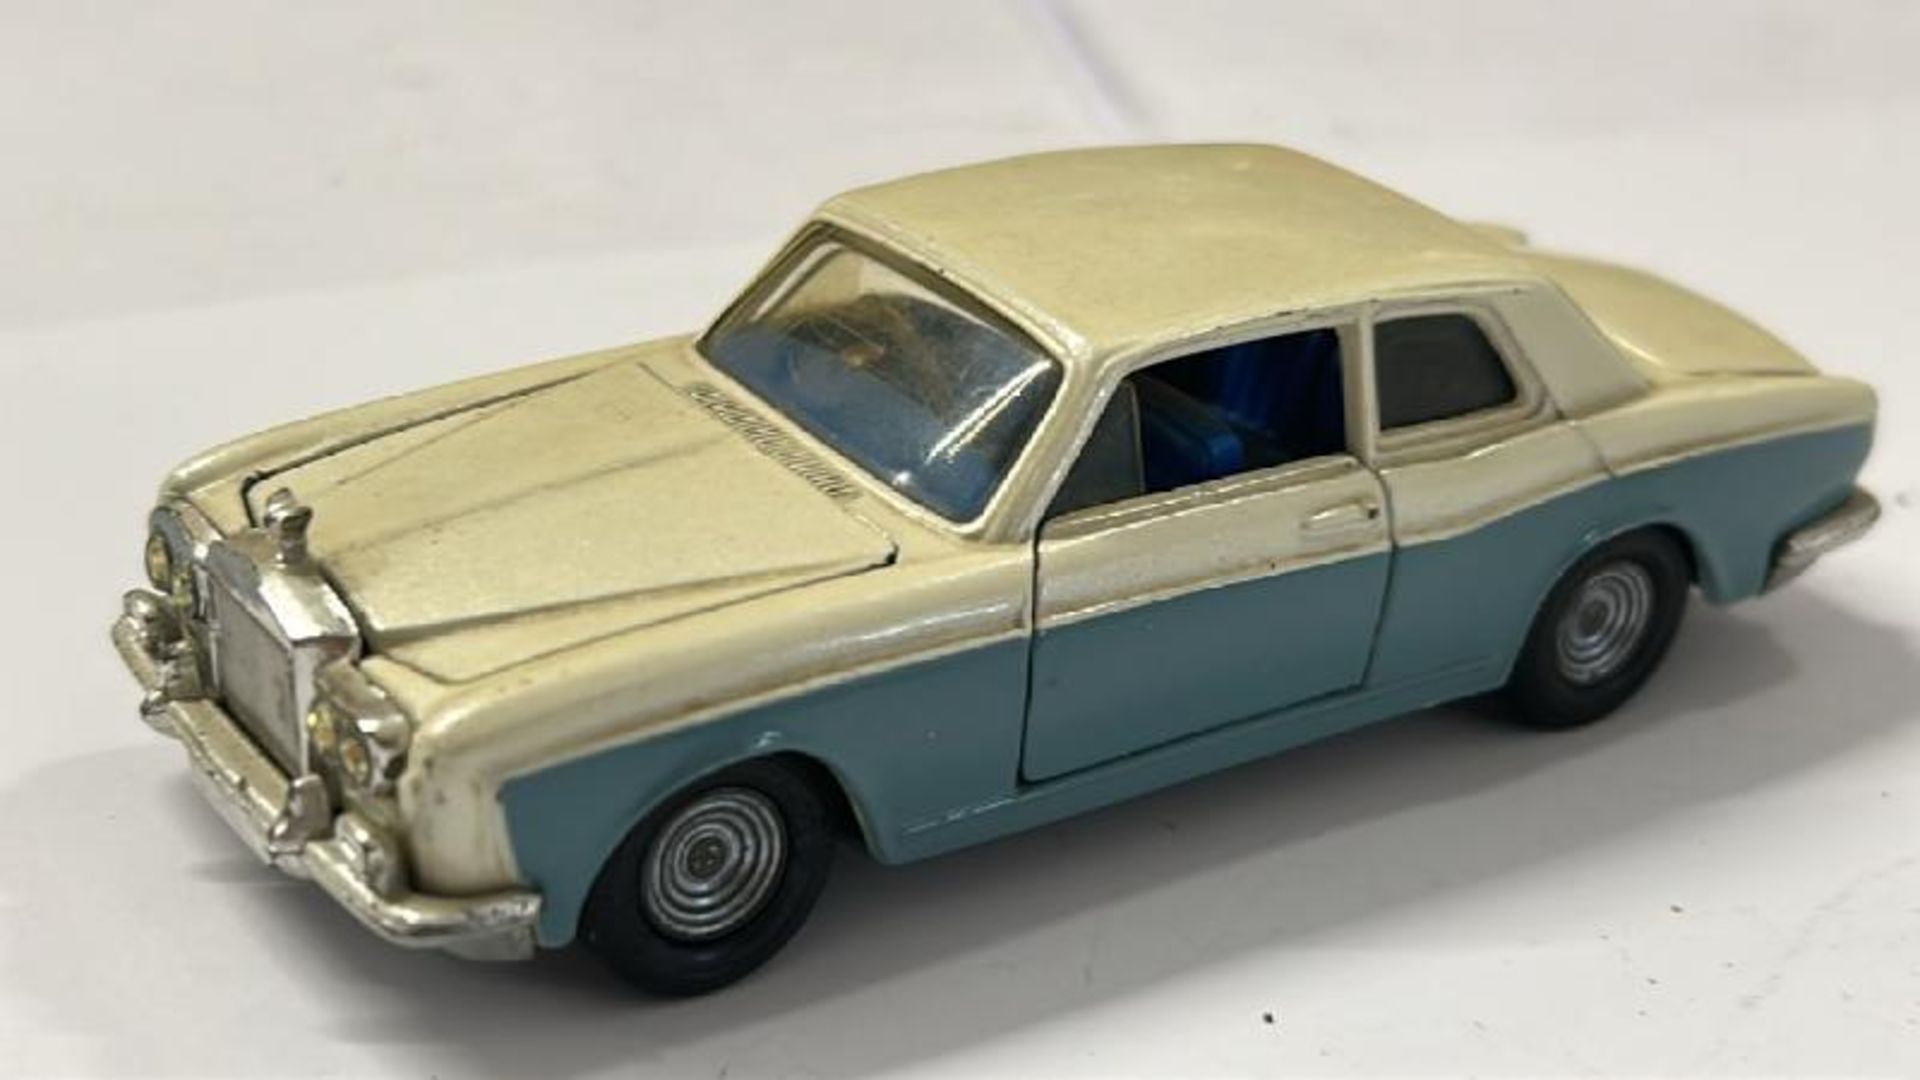 Unboxed Dinky & Corgi cars and caravans including Corgi Silver Shadow Rolls Royce and Dinky Rolls - Image 6 of 23